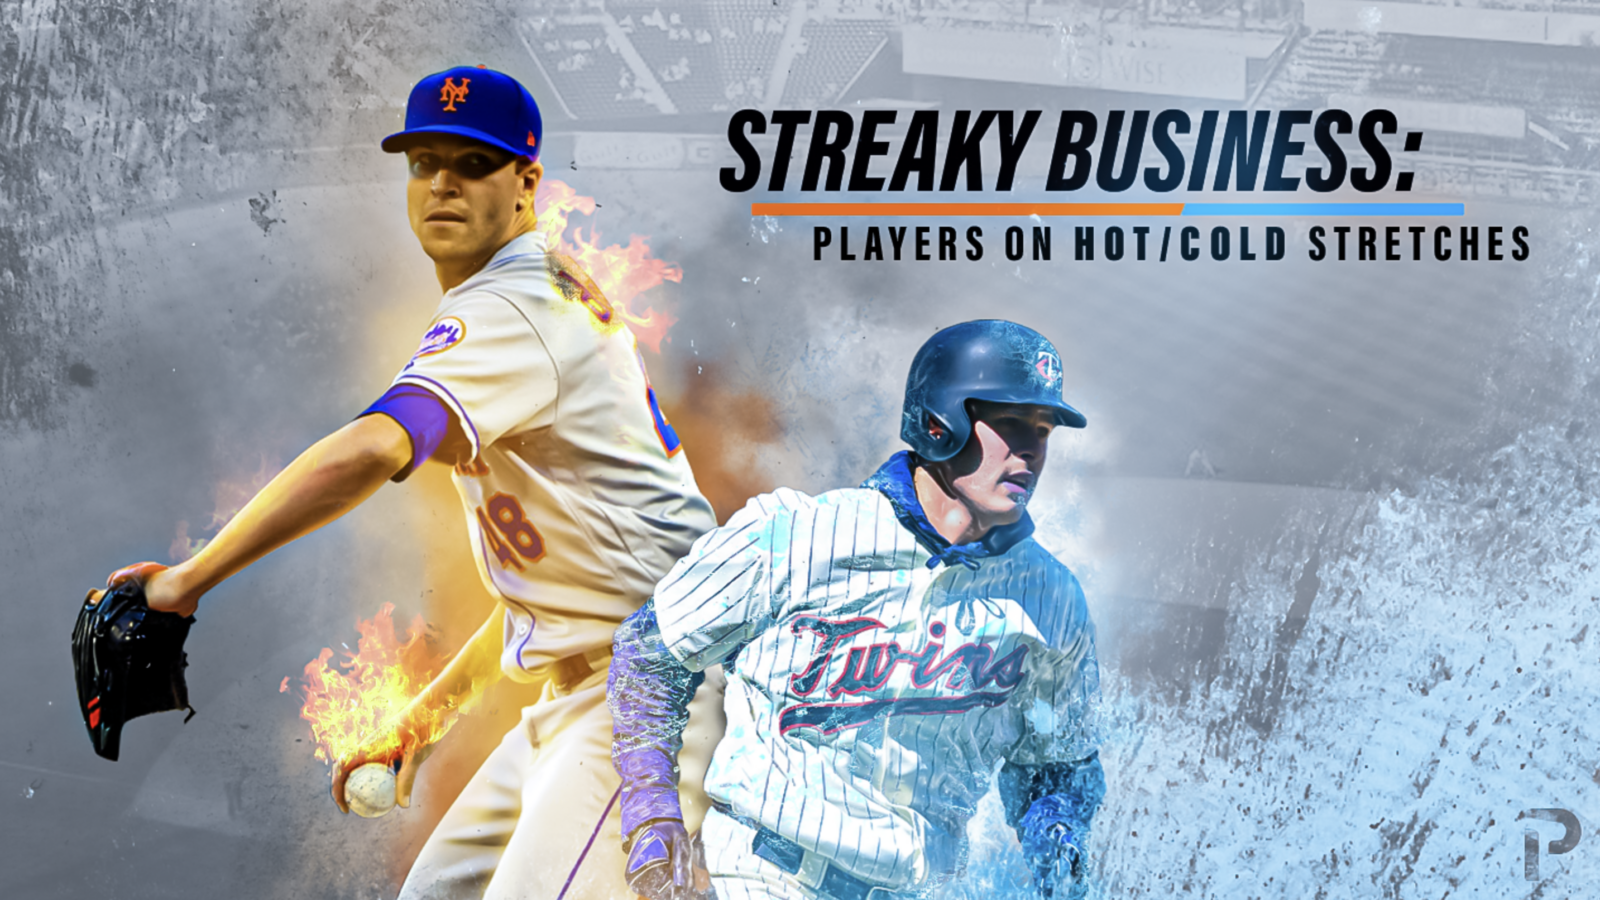 Streaky Business 9/11: Players on Hot/Cold Stretches